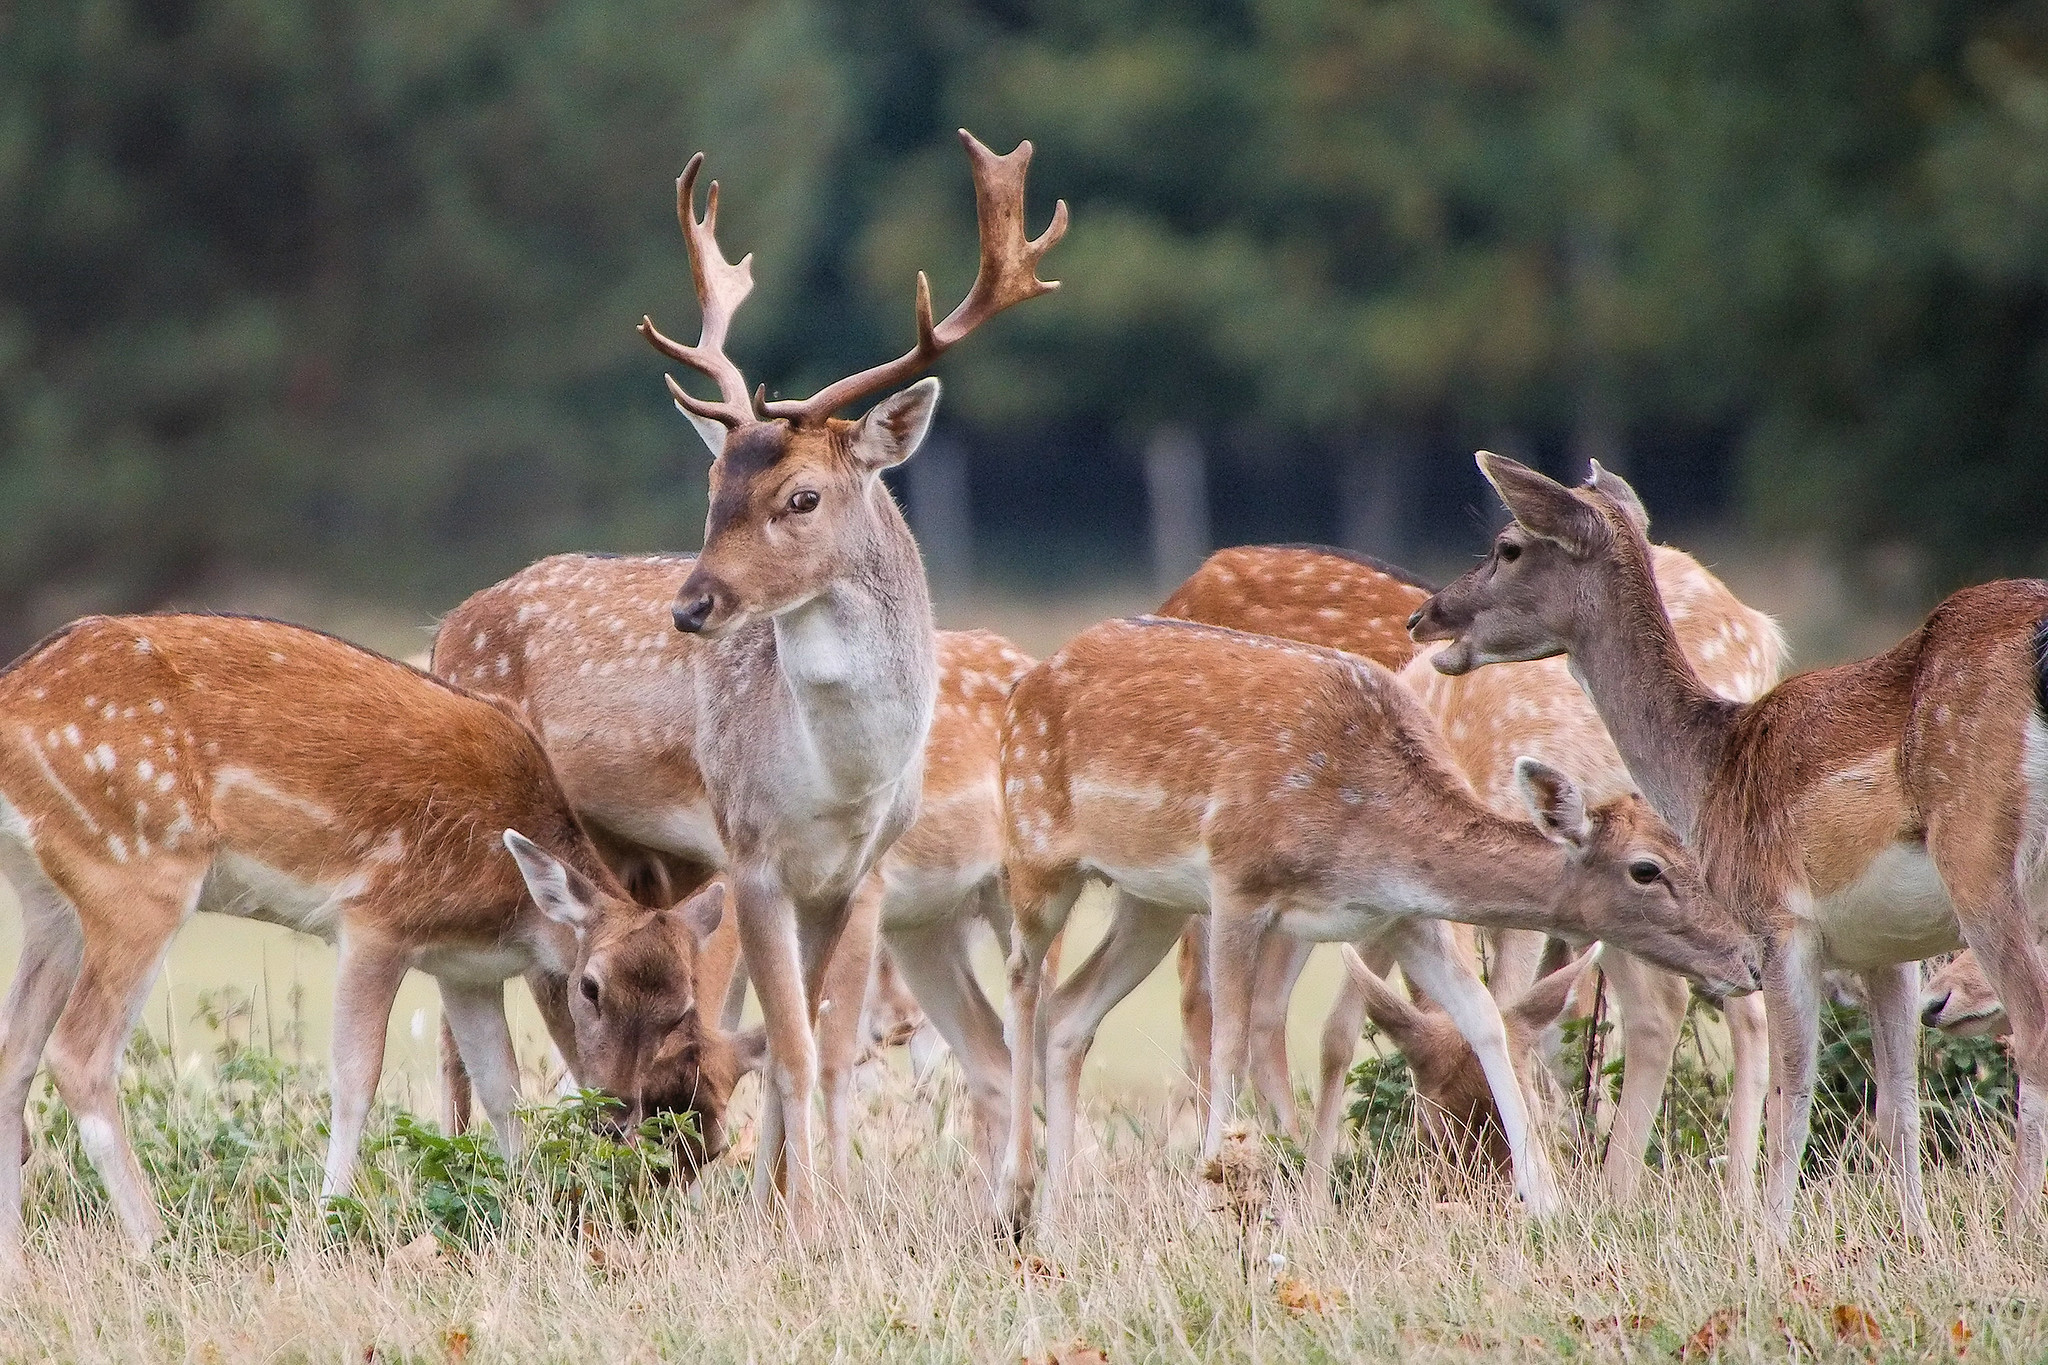 How many deer are considered a herd?